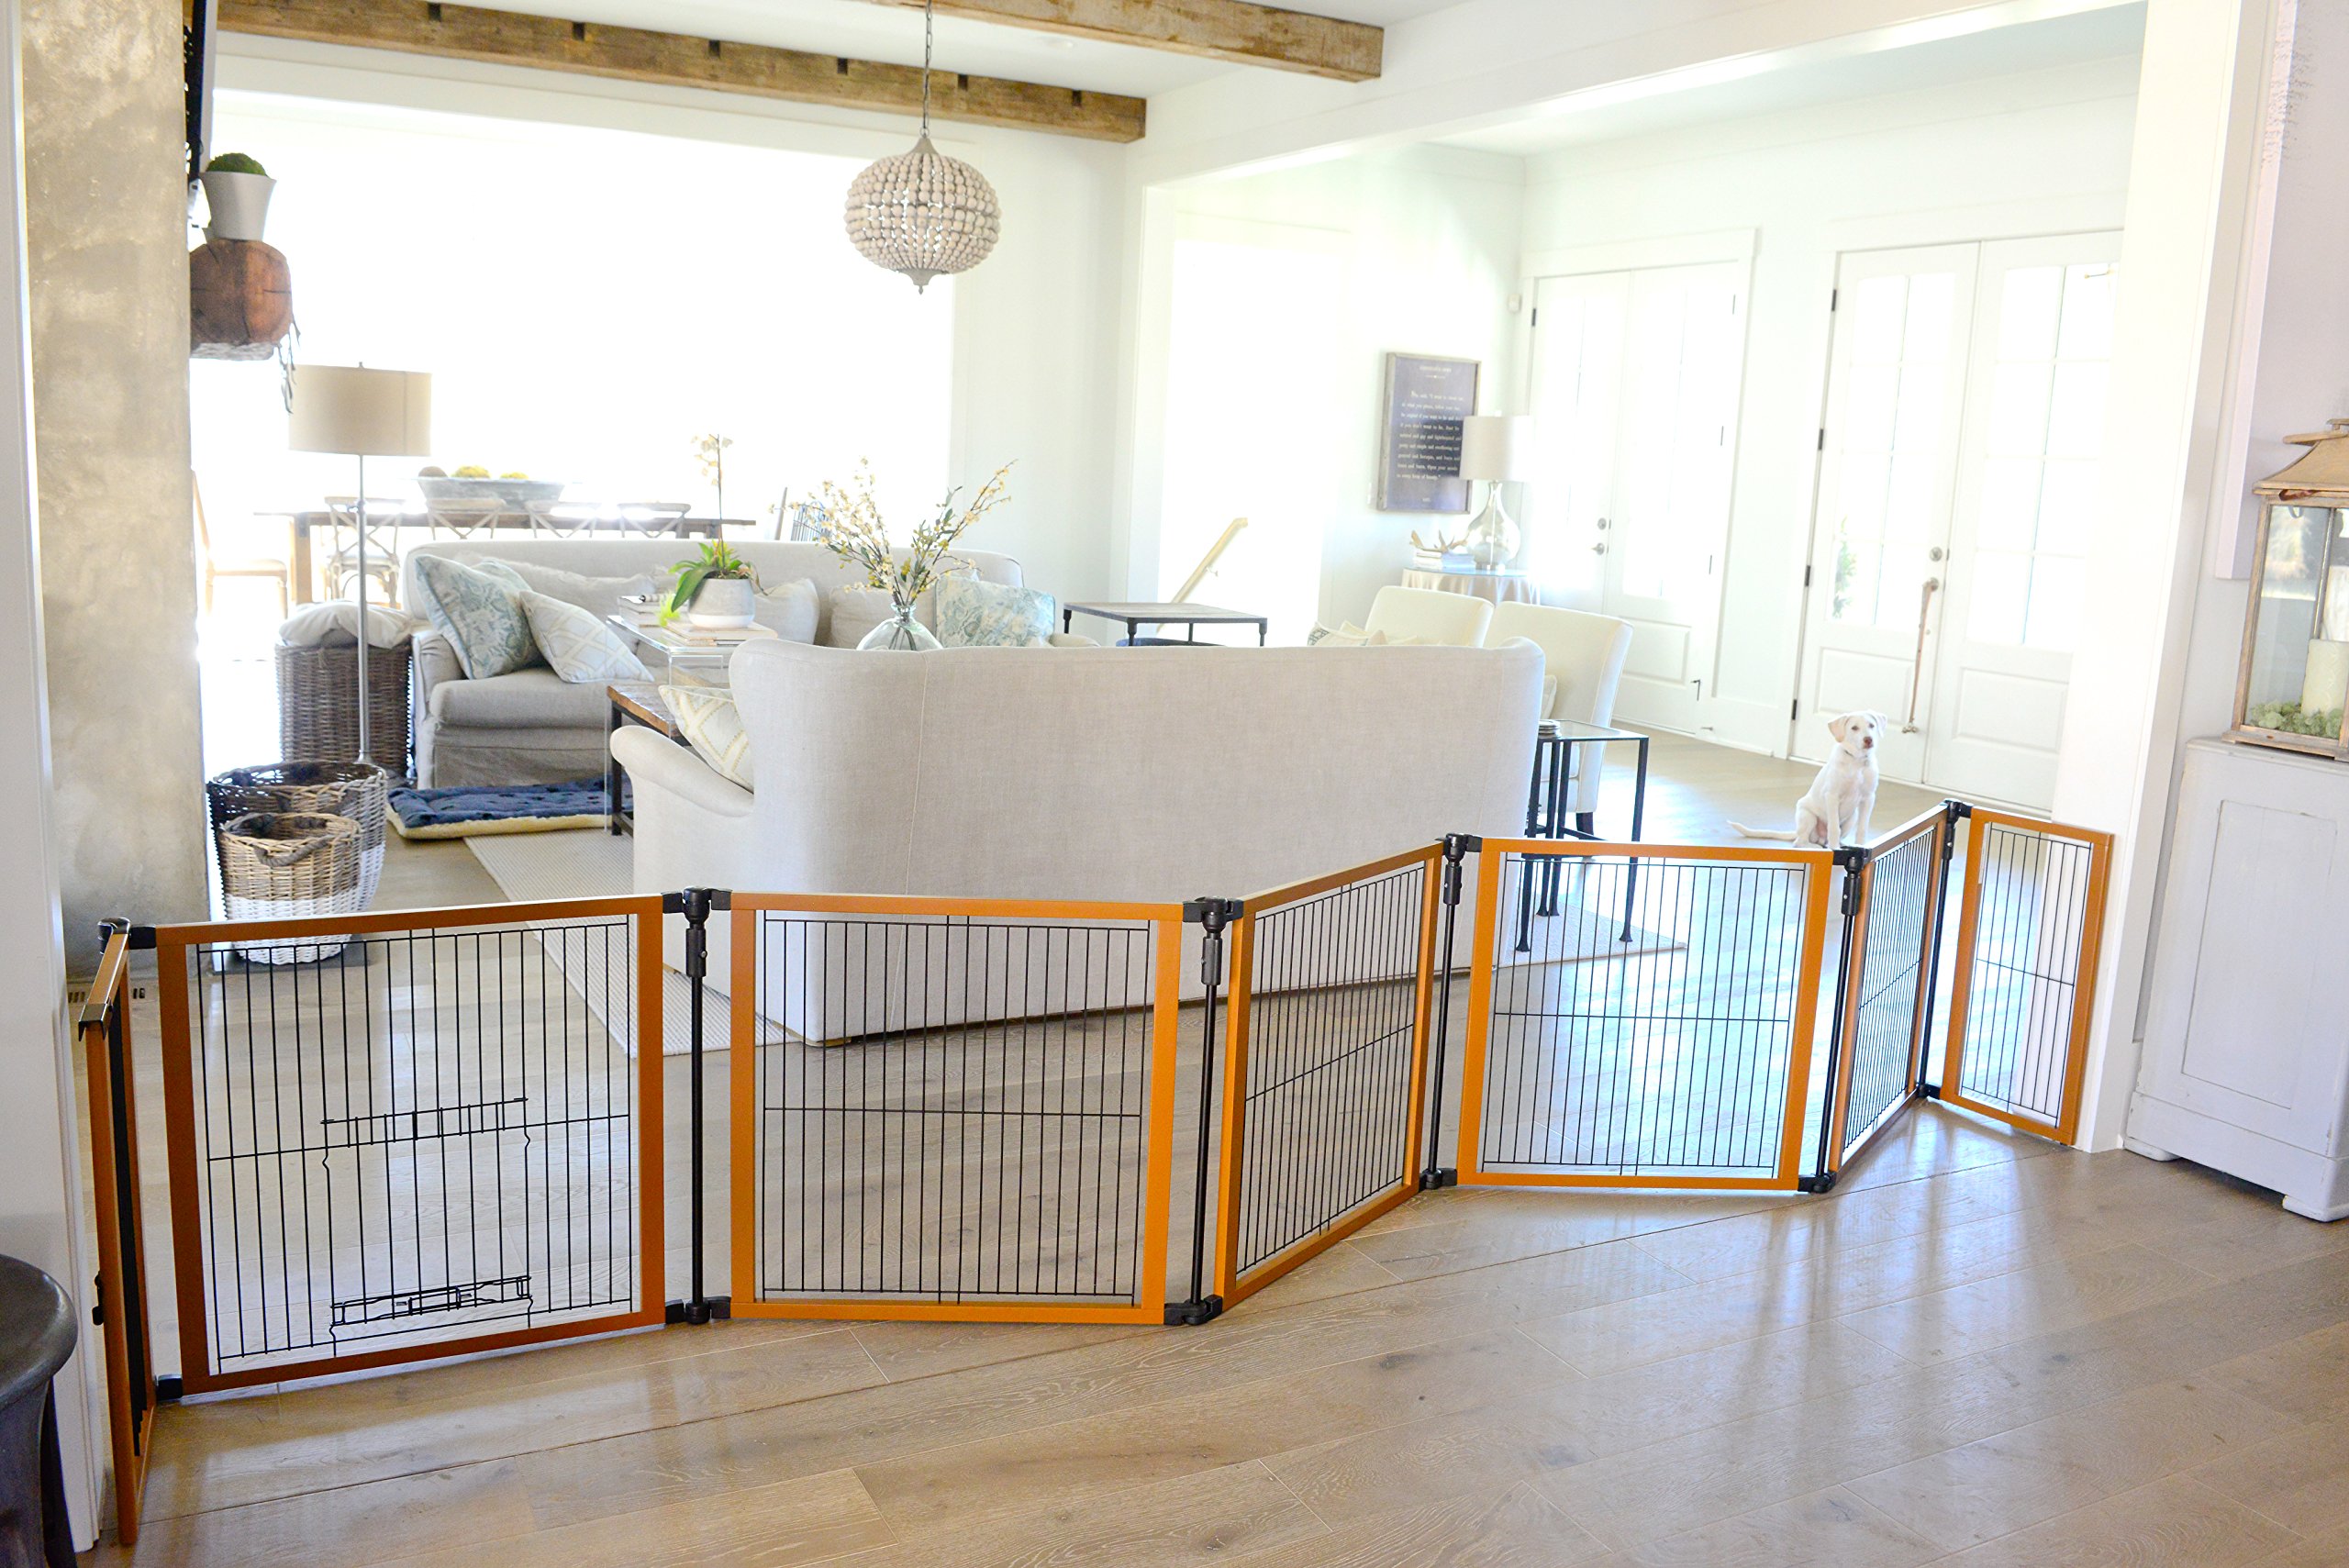 5 Pet Gates That Could Be Used For Garage Door Openings | PetAndBabyGates